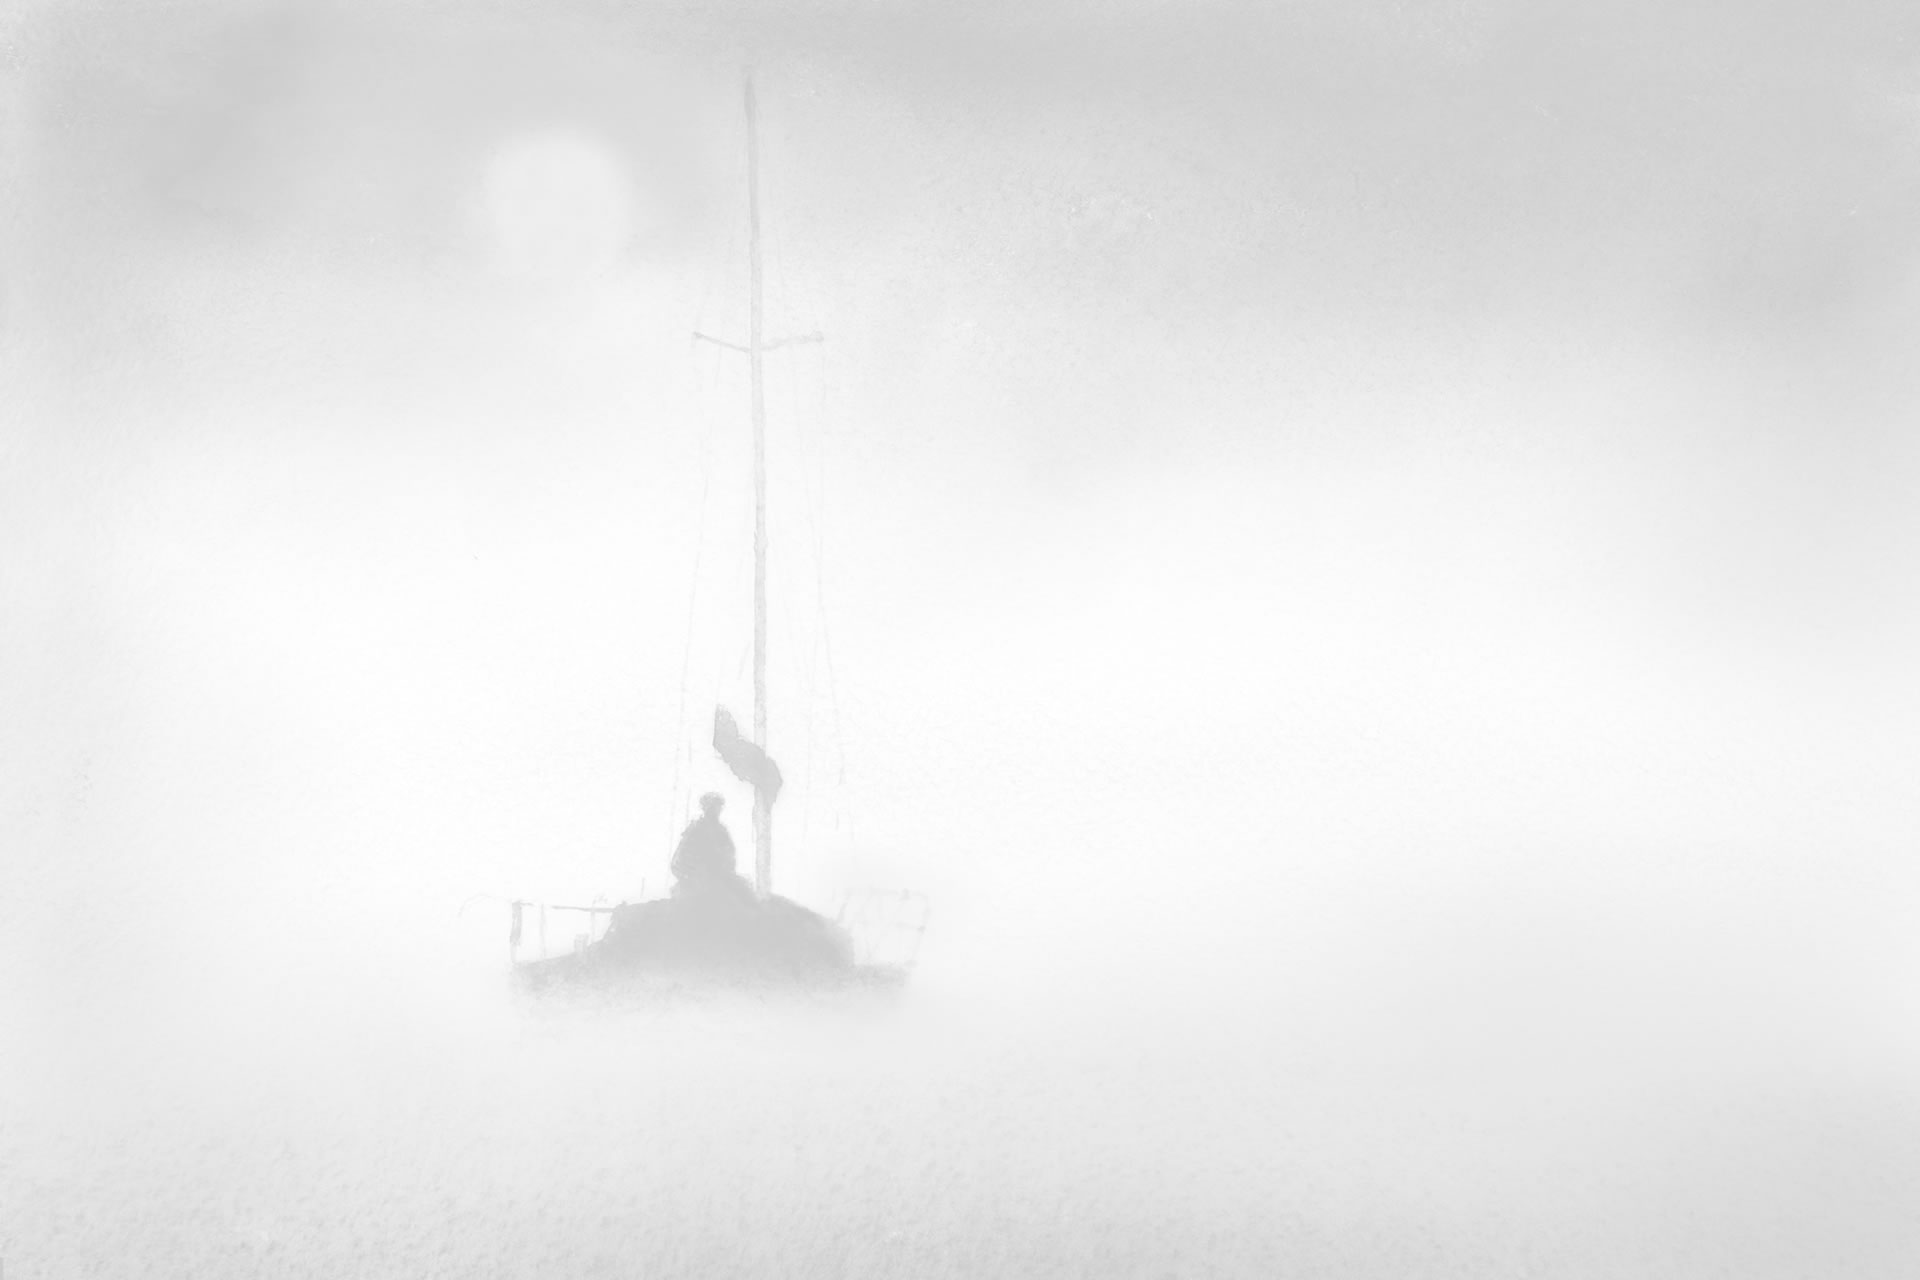 Sailor off shore in the fog